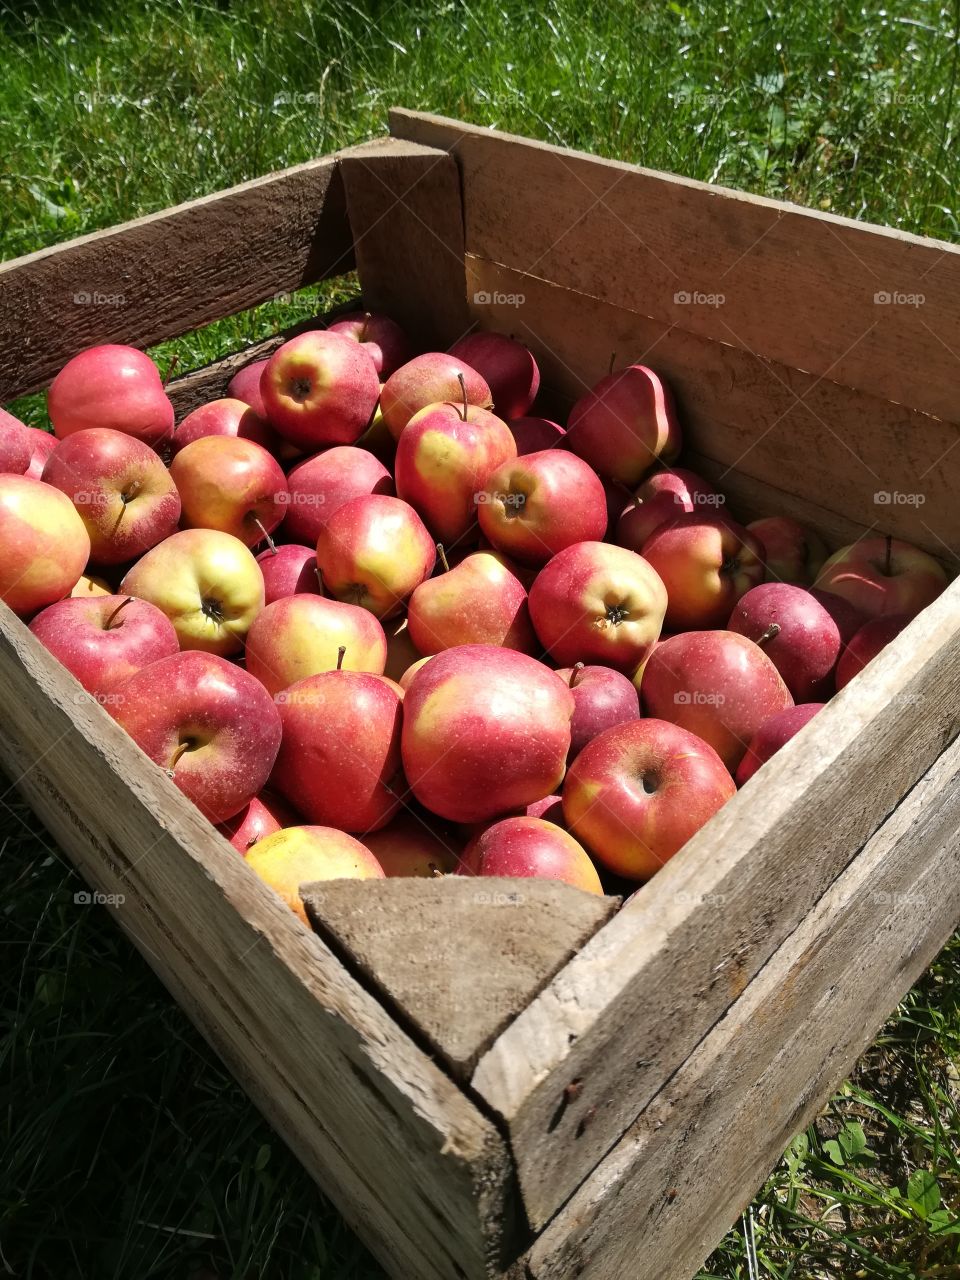 A container filled with red apples